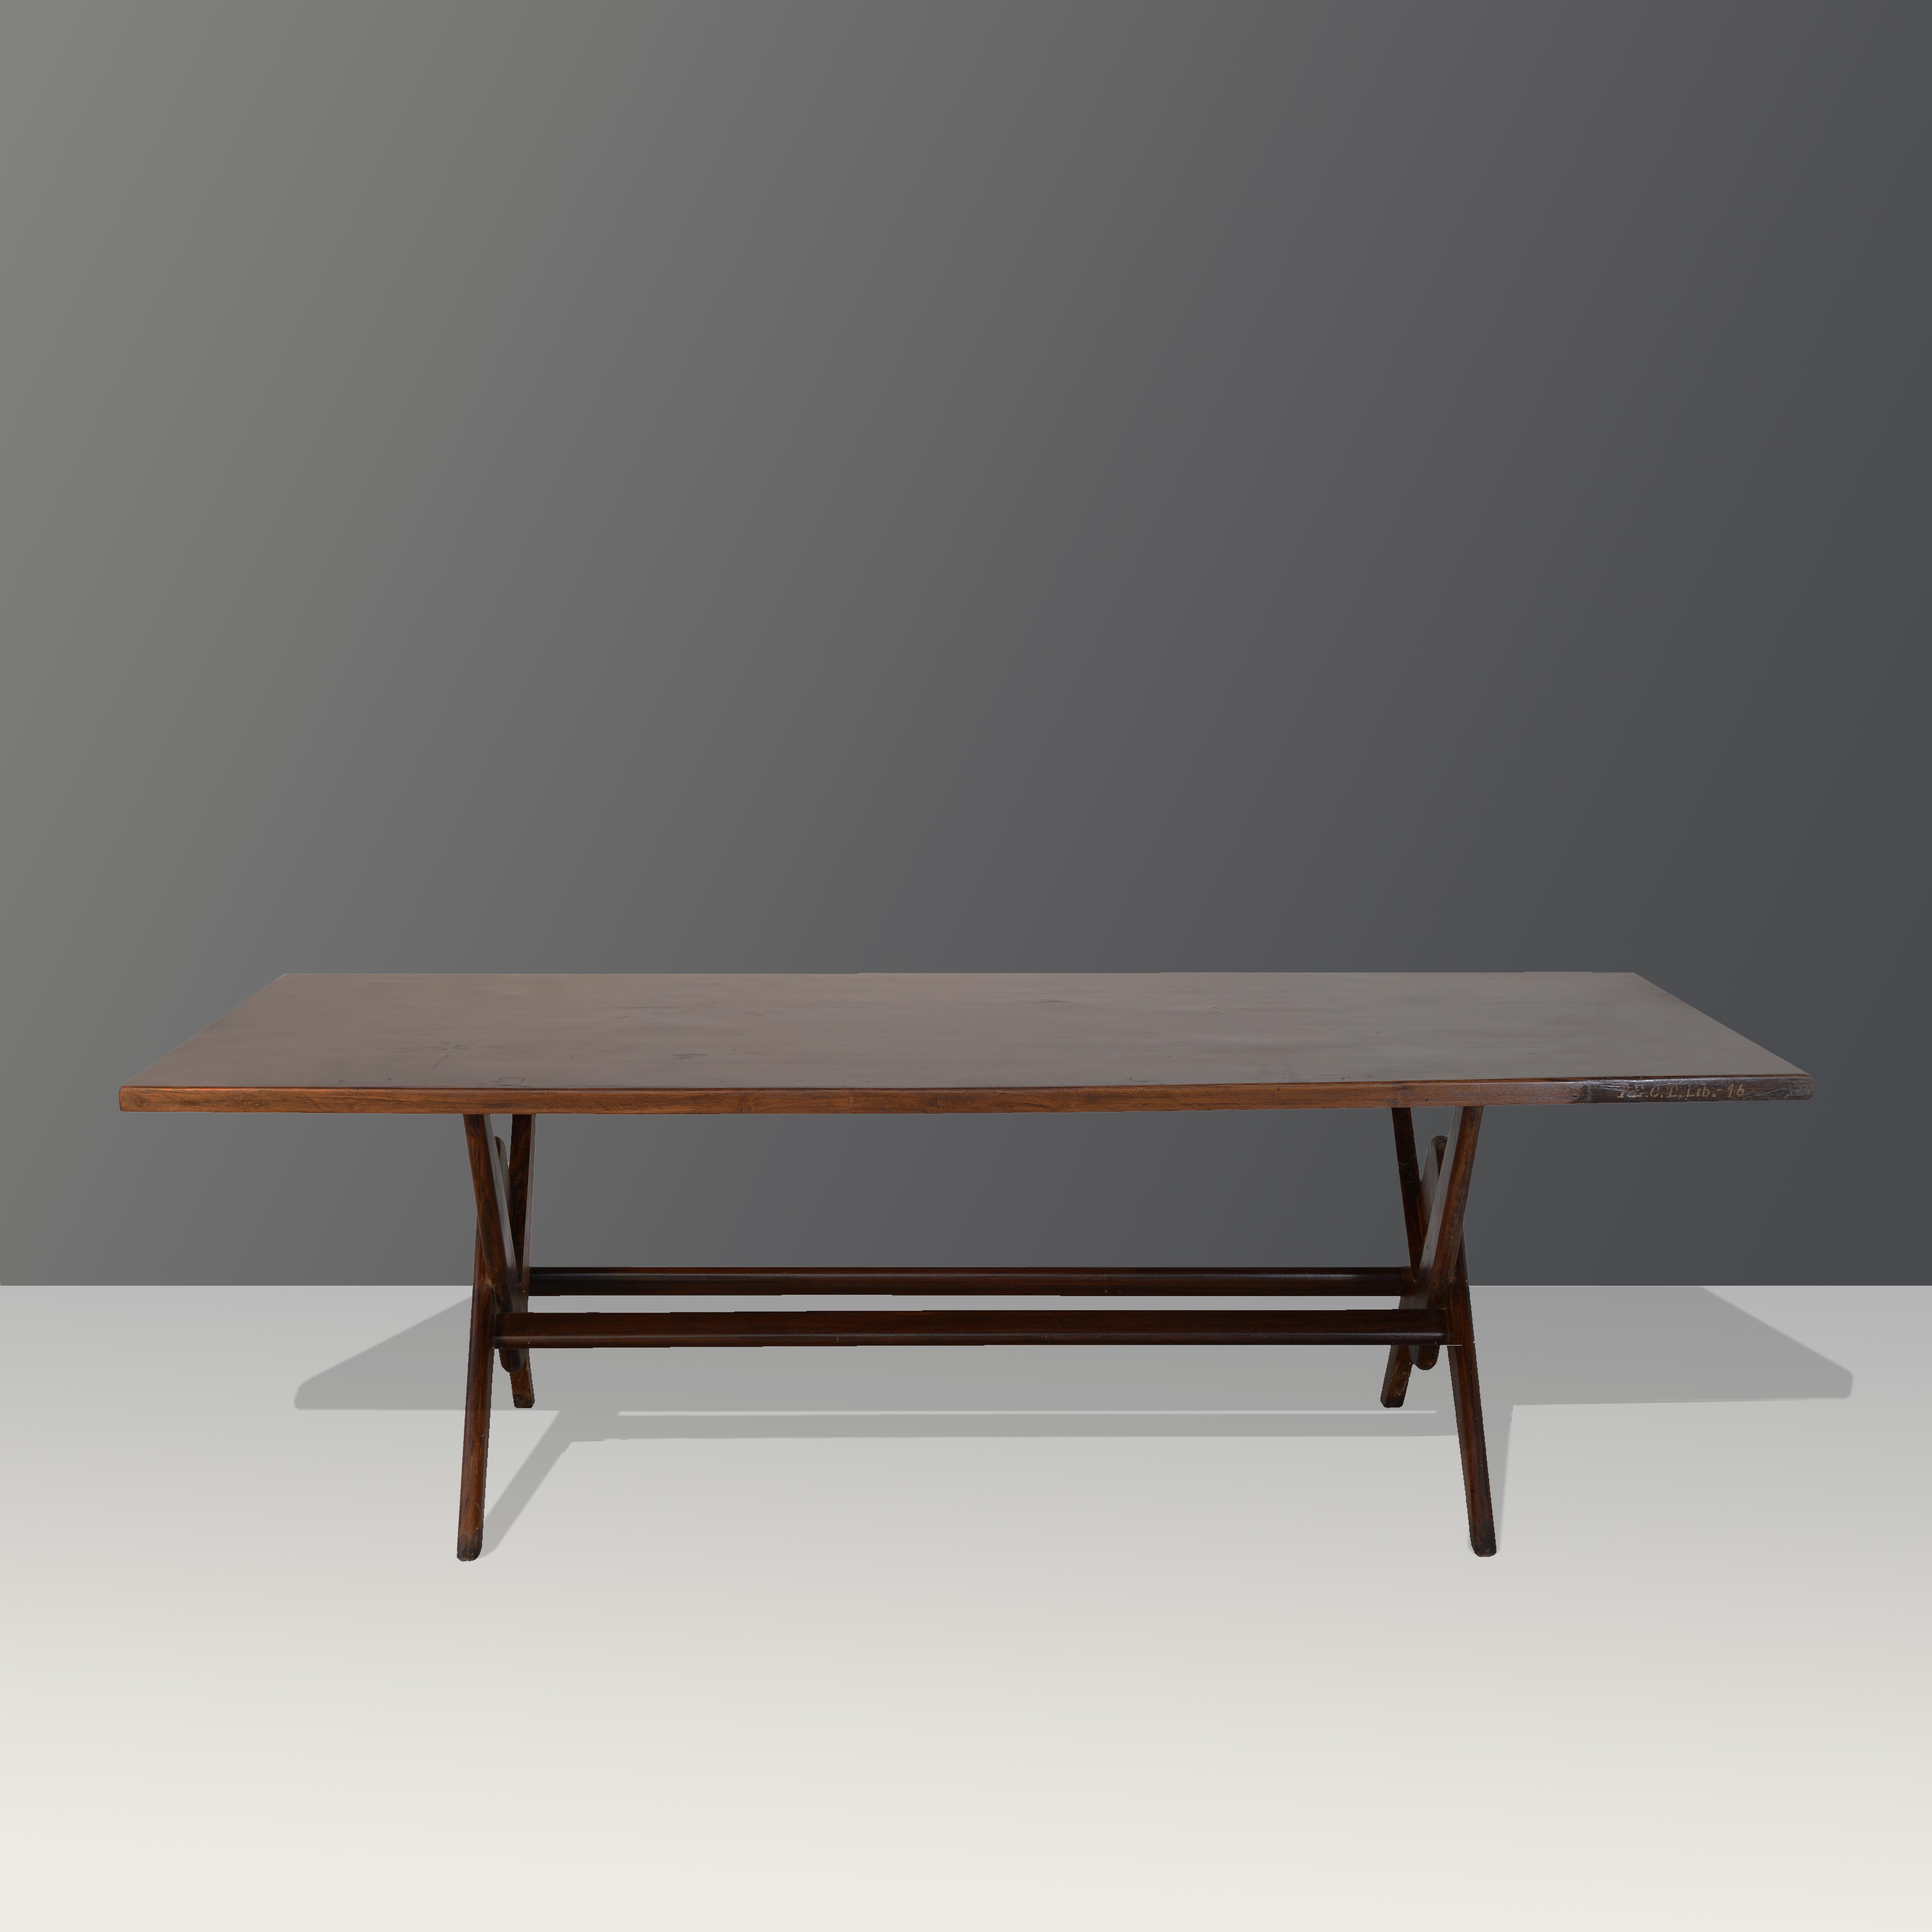 This table is an iconic design piece created by Le Corbusier and Pierre Jeanneret. It is raw in its simplicity and it shows a slightly patinated material. It's shape is beautifully fragile and has a wonderful color. We don't restore them too much.